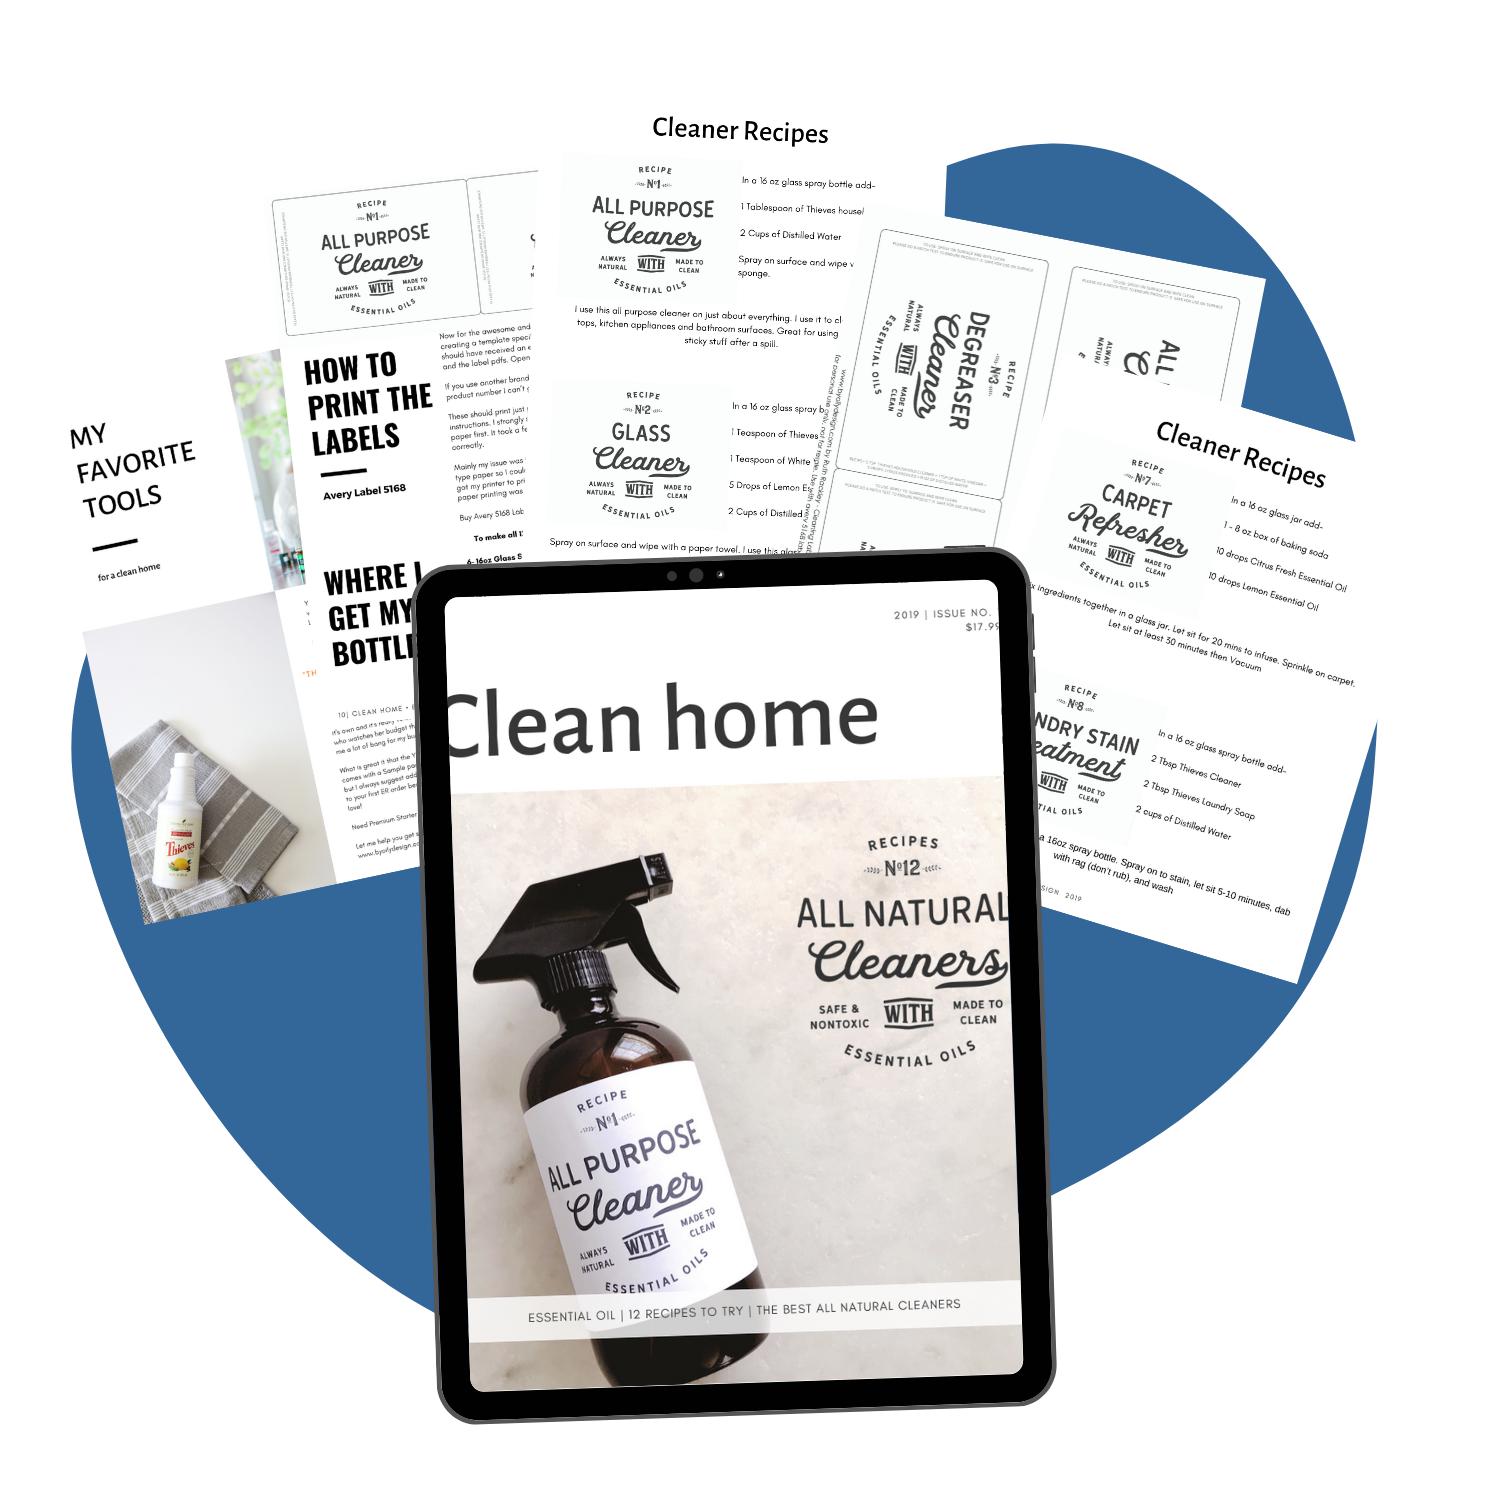 Clean Home- Cleaning recipes and labels